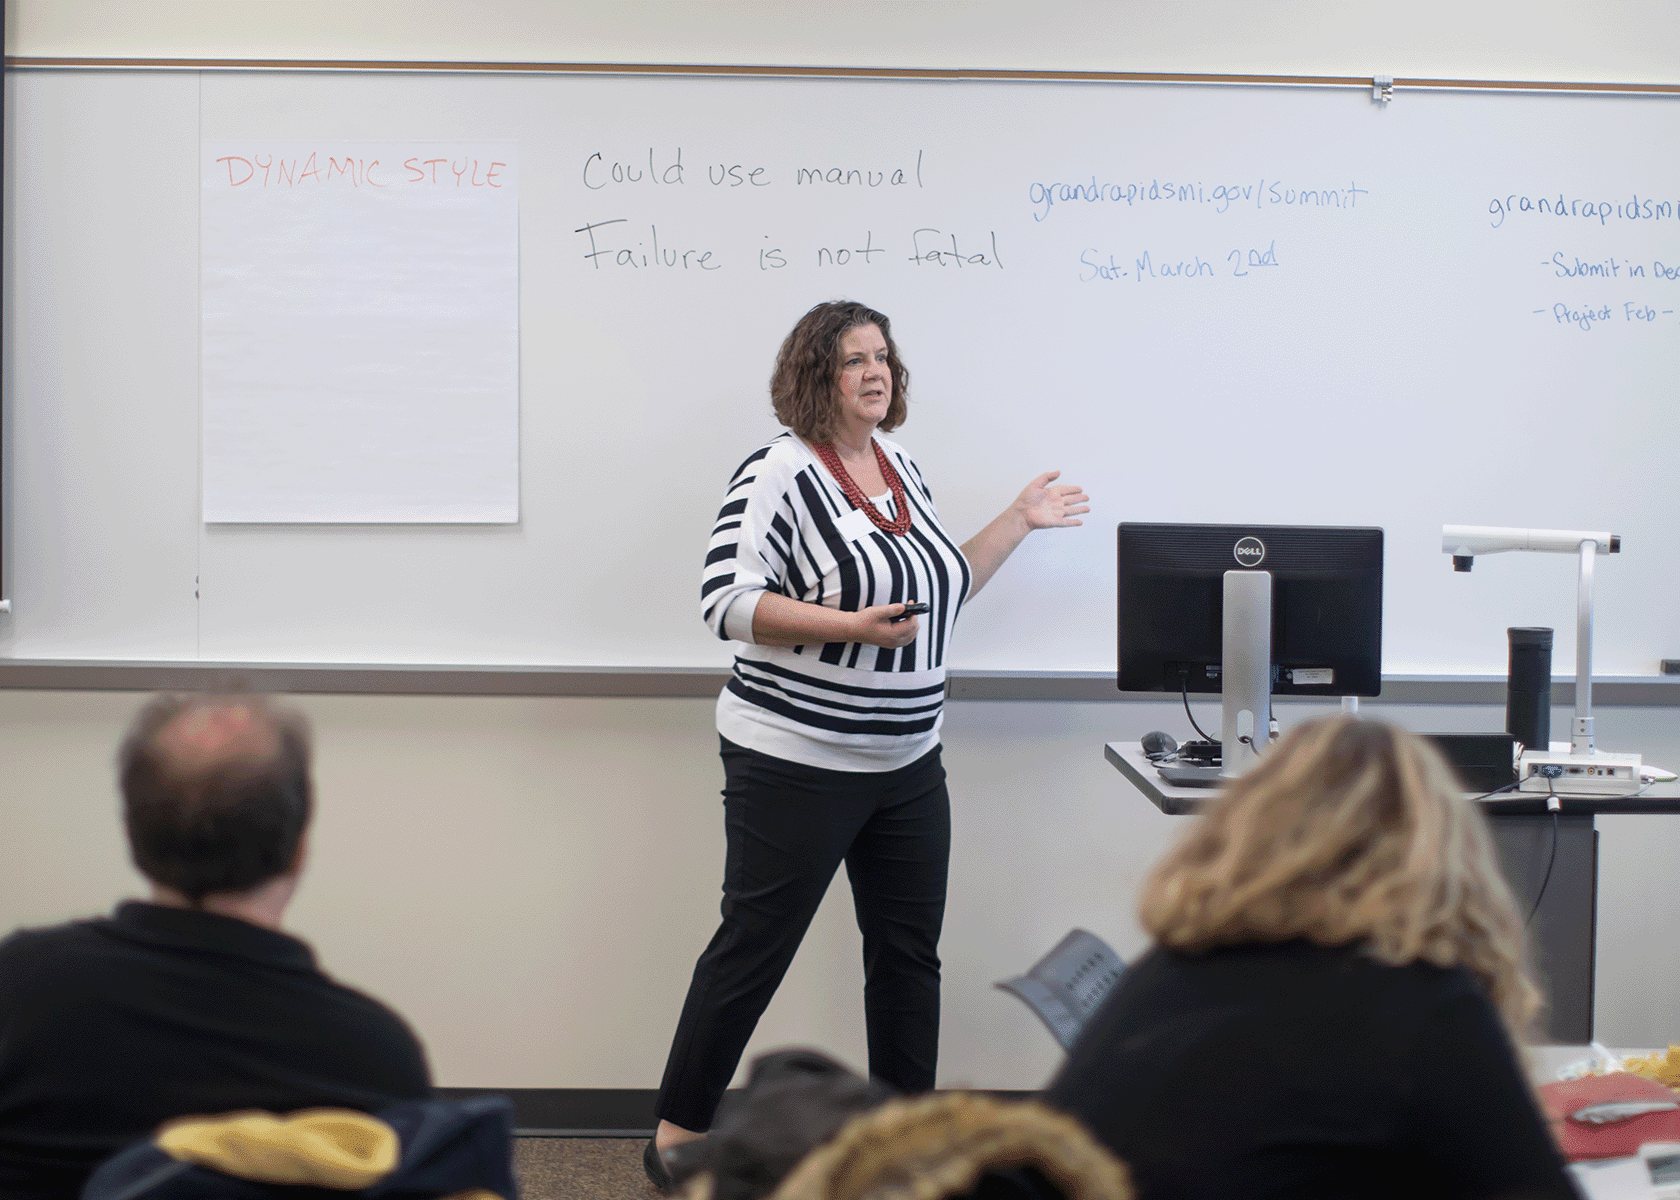 woman presenting with a whiteboard behind her